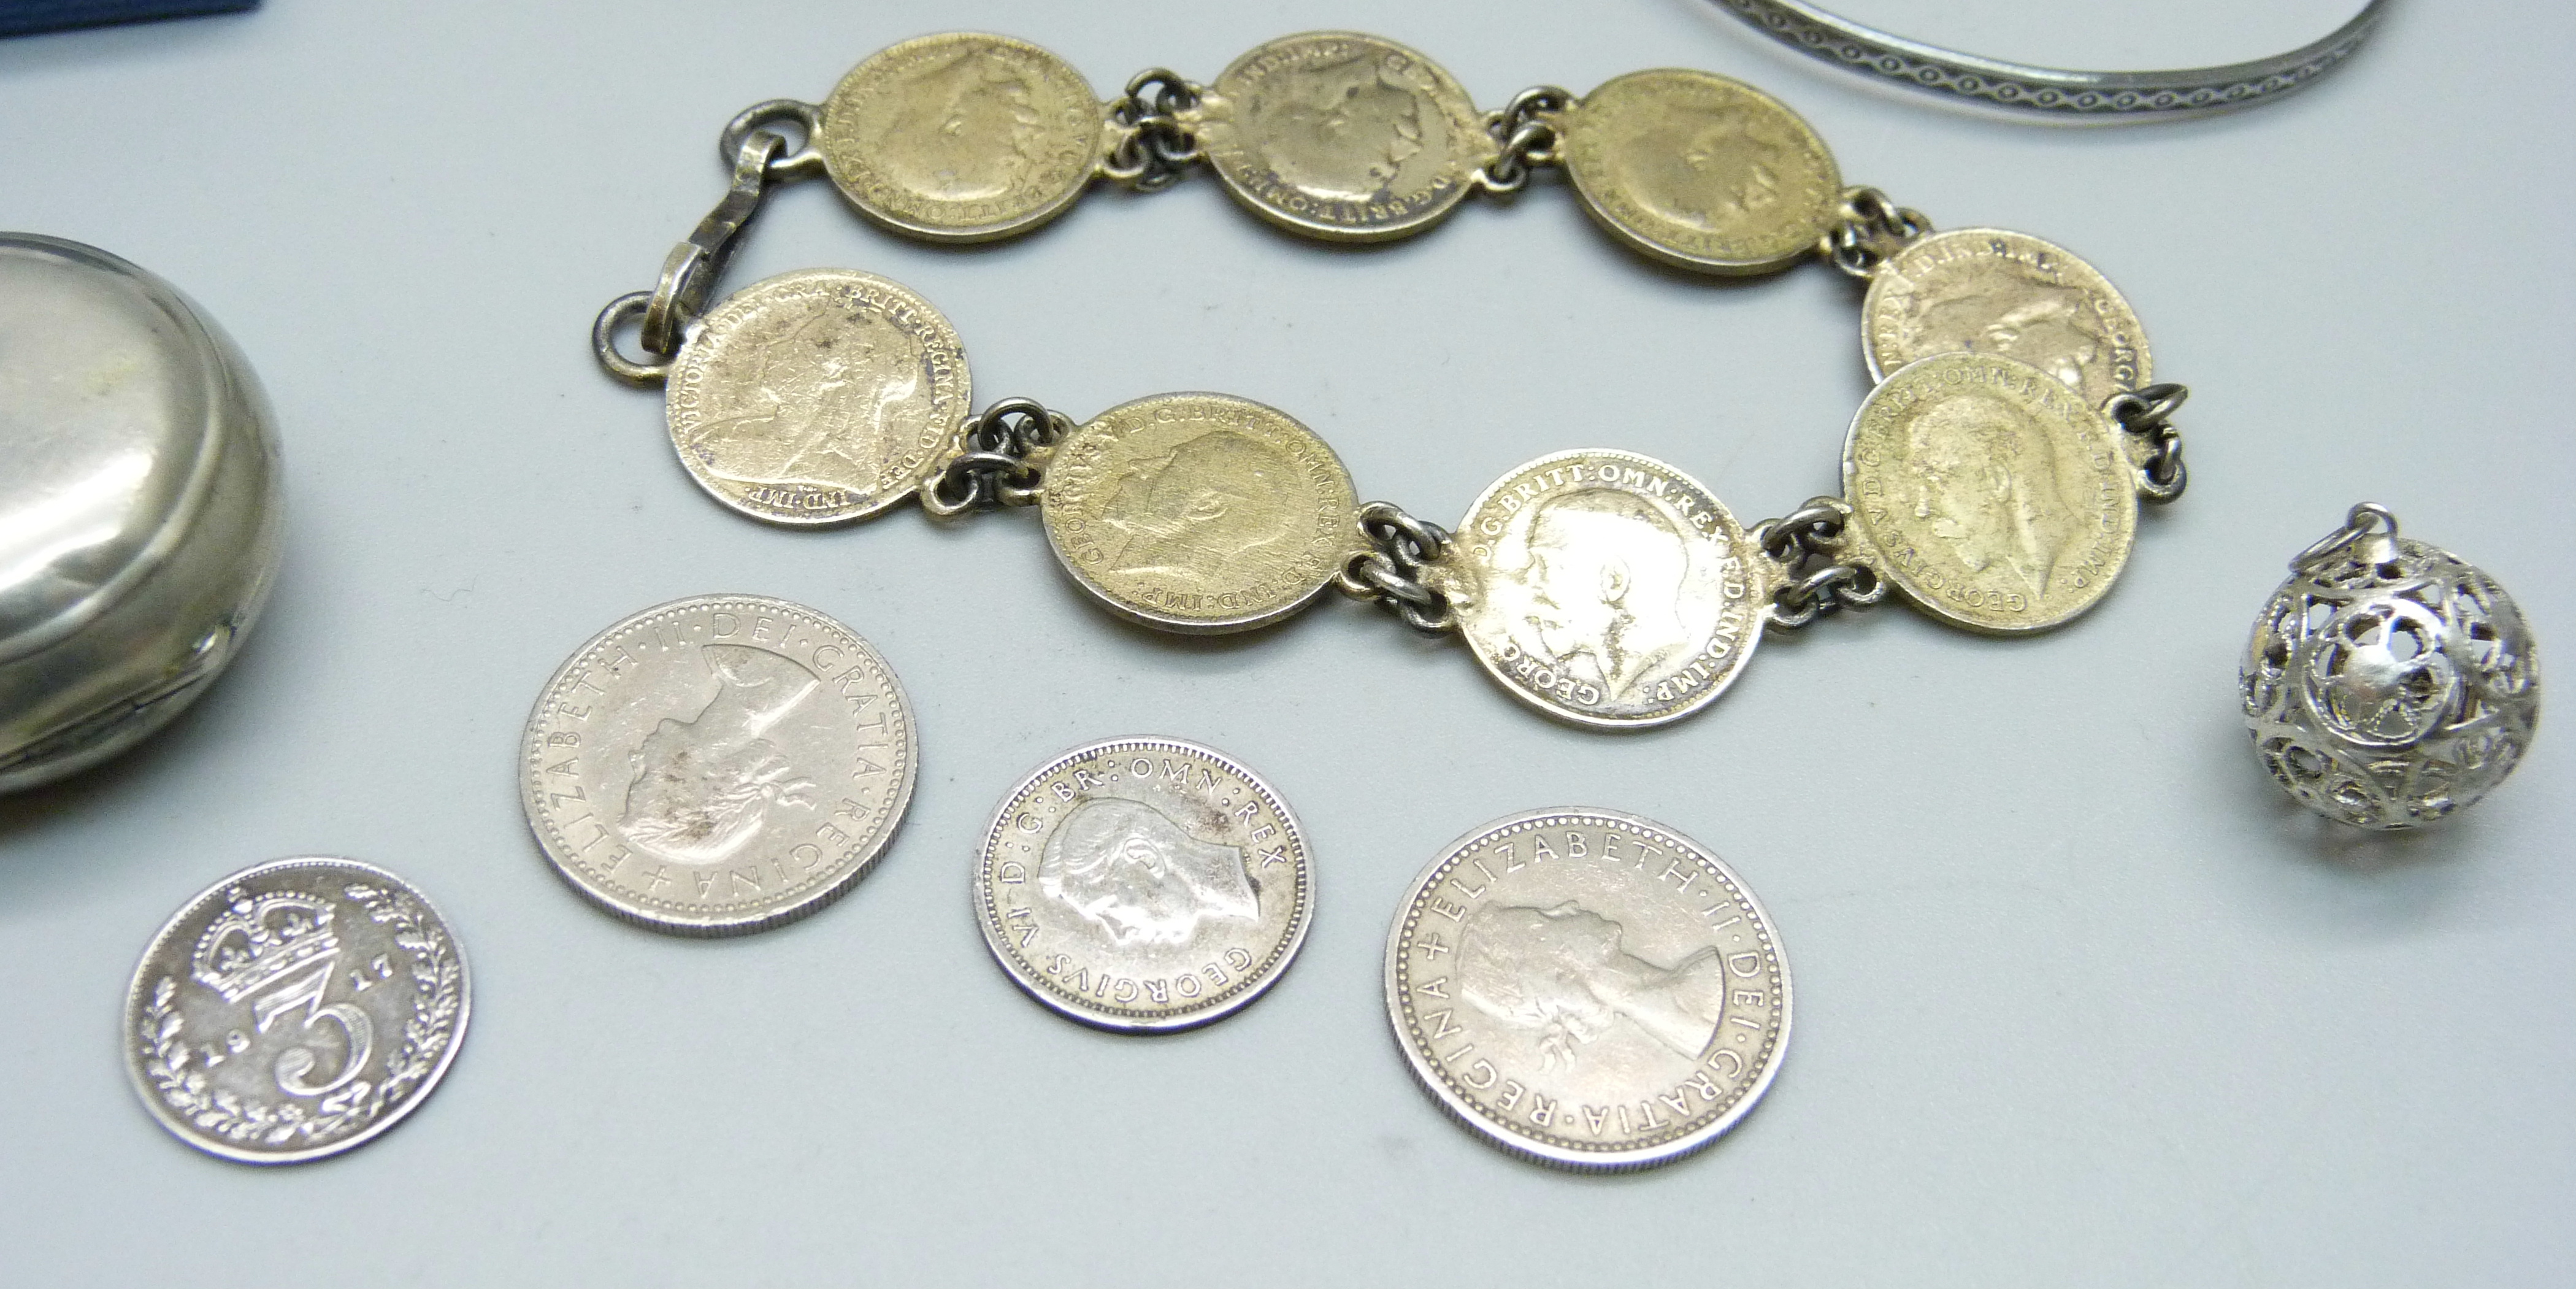 Silver jewellery including four silver bangles and a silver charm bracelet, coins and a sovereign - Image 5 of 6